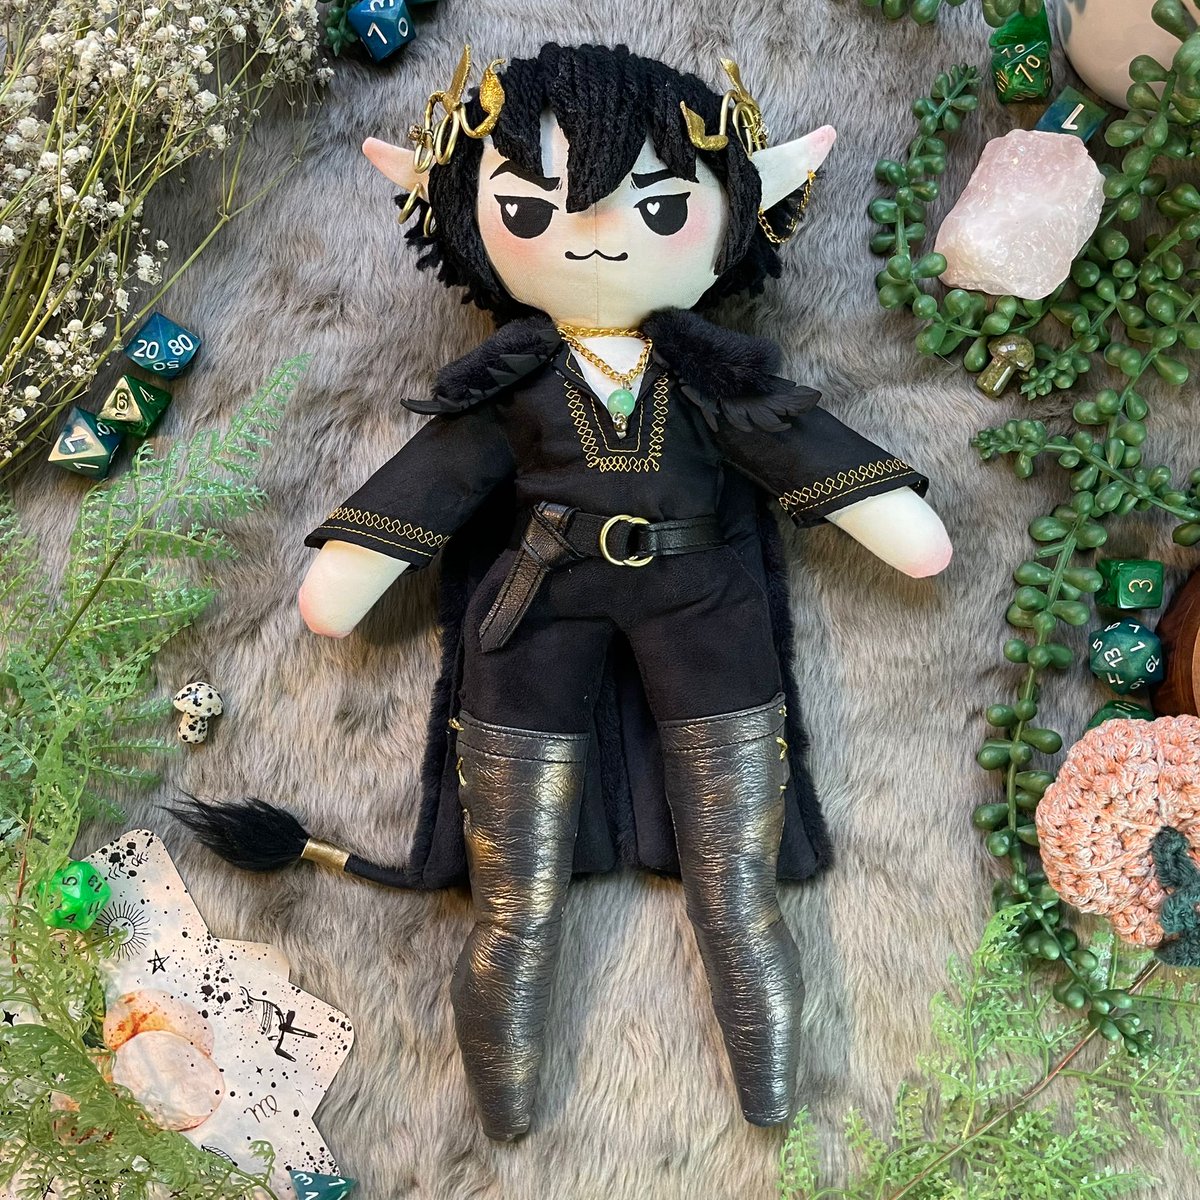 Cardan Greenbriar 🖤🖤

This was my first commission to make a character from a book!
Character by @hollyblack

#dollmaker #dollclothes #artdoll #plushie #heirloomdoll #handmade #ragdoll #cardangreenbriar #cardanandjude #thefolkoftheair